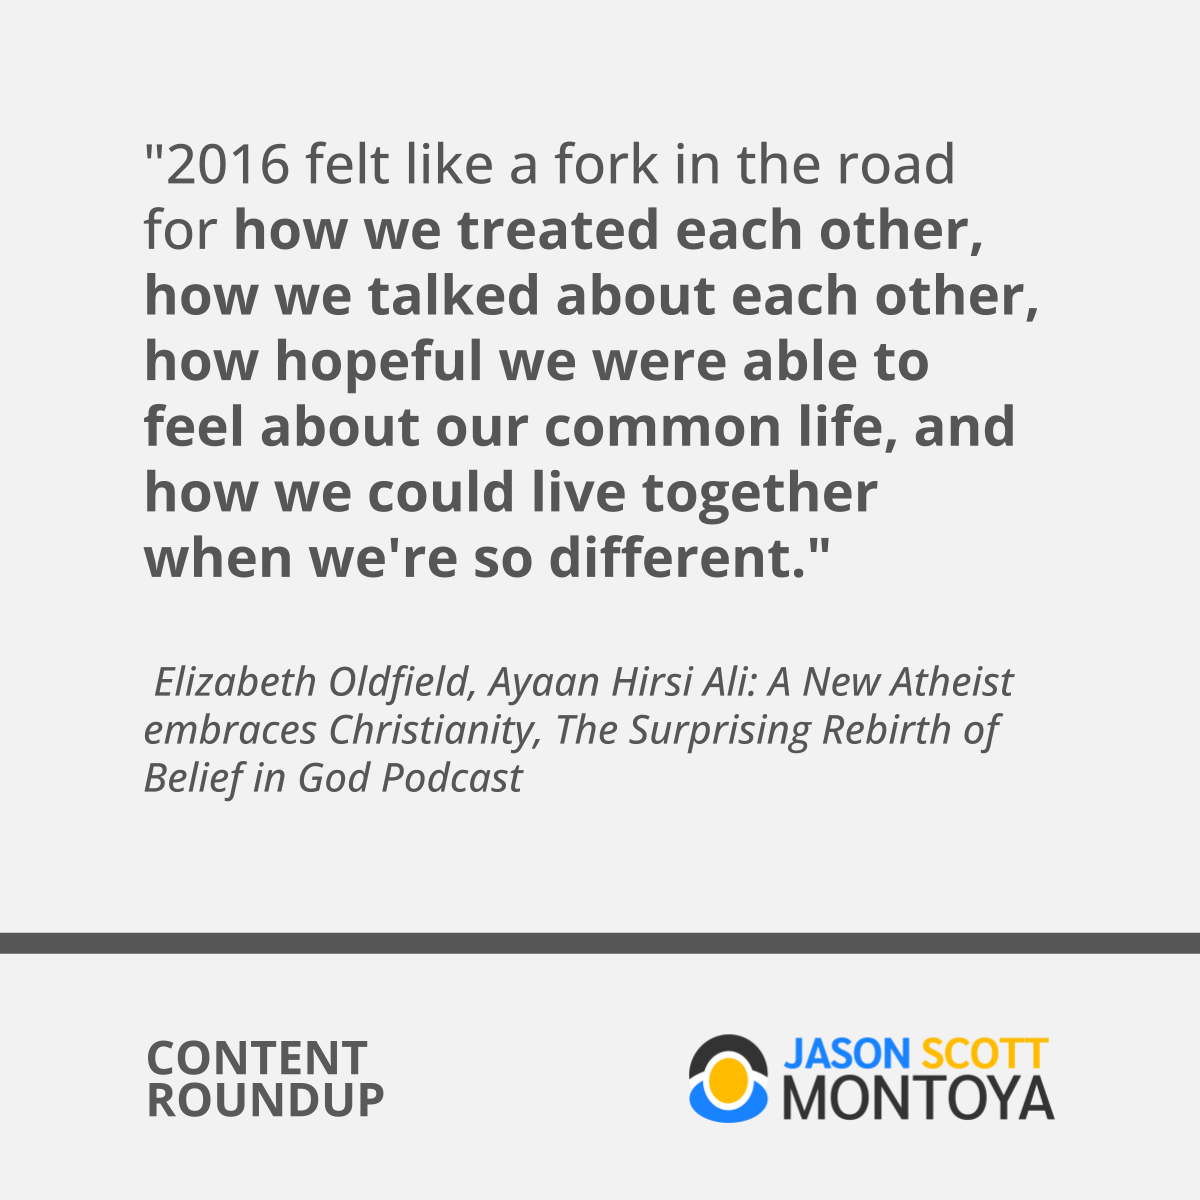 "2016 felt like a fork in the road for how we treated each other, how we talked about each other, how hopeful we were able to feel about our common life, and how we could live together when we're so different."   Elizabeth Oldfield, Ayaan Hirsi Ali: A New Atheist embraces Christianity, The Surprising Rebirth of Belief in God Podcast